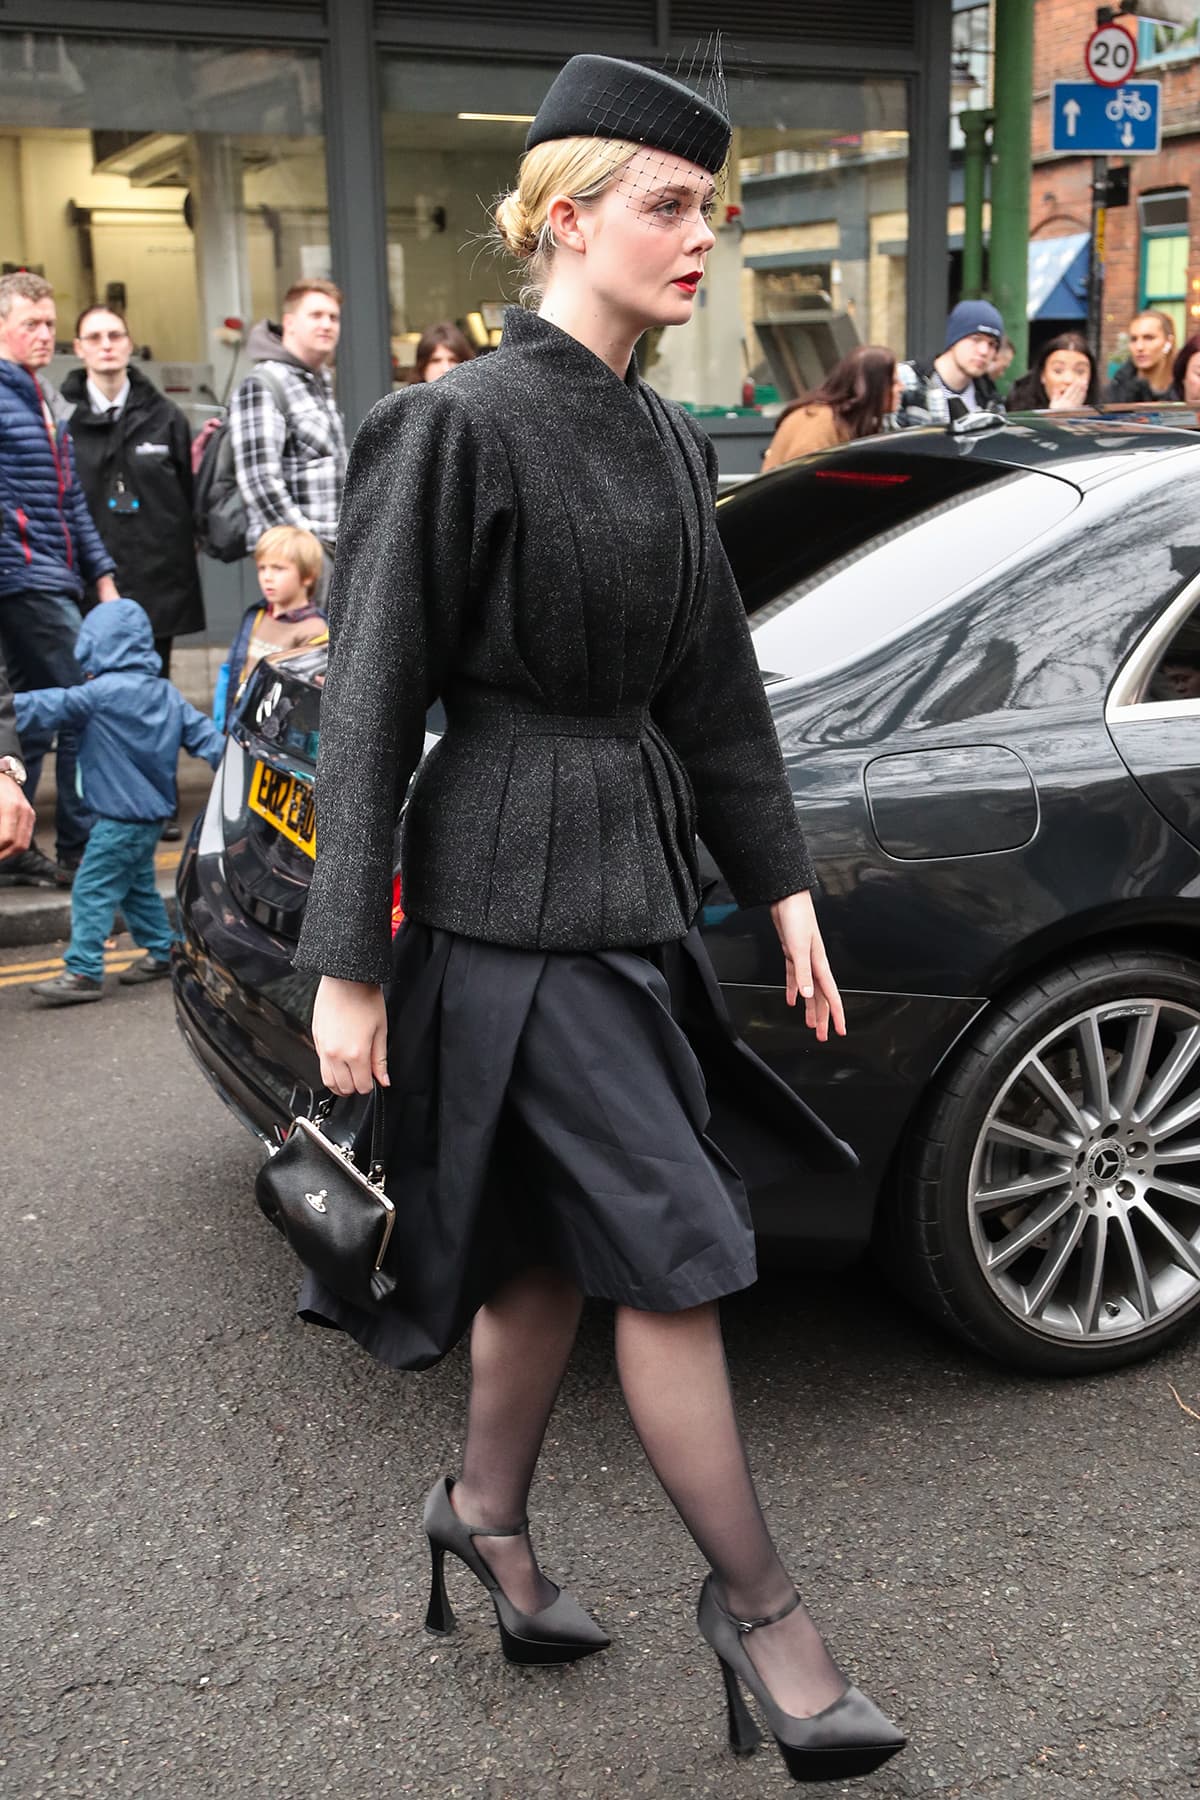 Elle Fanning attends Vivienne Westwood's memorial service in a black knee-length dress with a pleated wool jacket and high-heel Mary Jane pumps